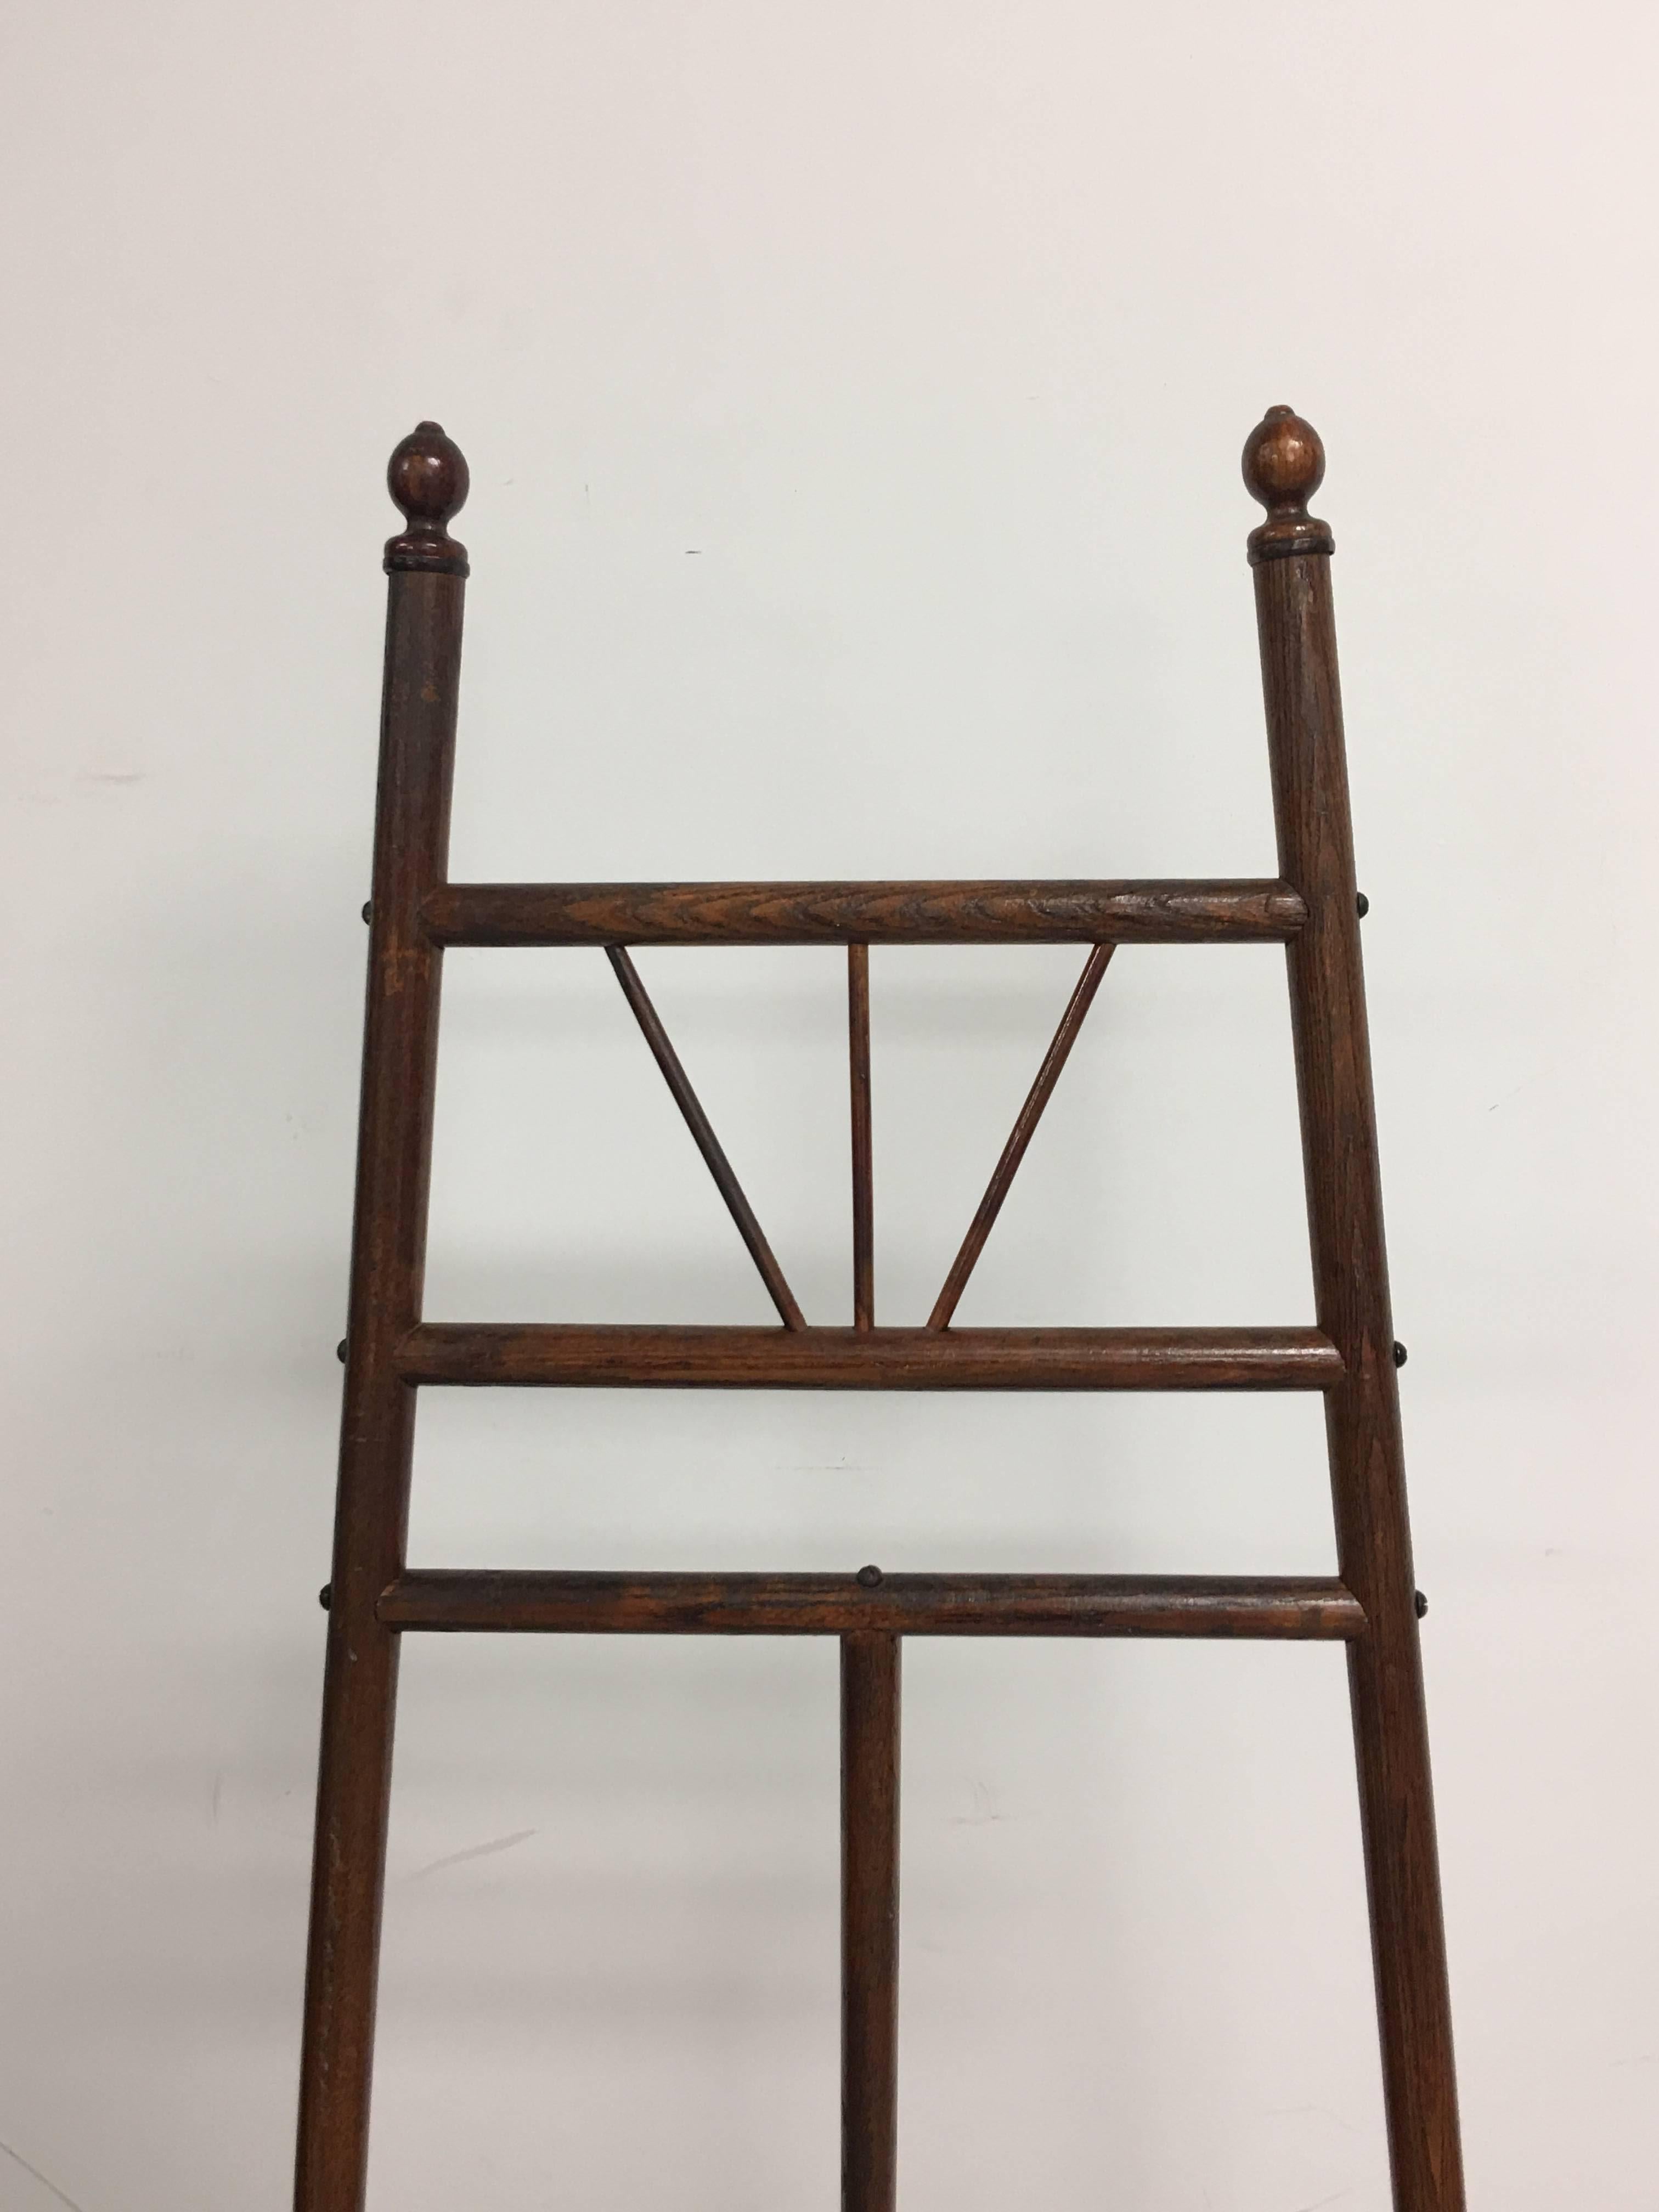 Offered is a stunning, late 19th-early 20th century, English oak easel. Extremely sturdy. Looks as if it's never been used.